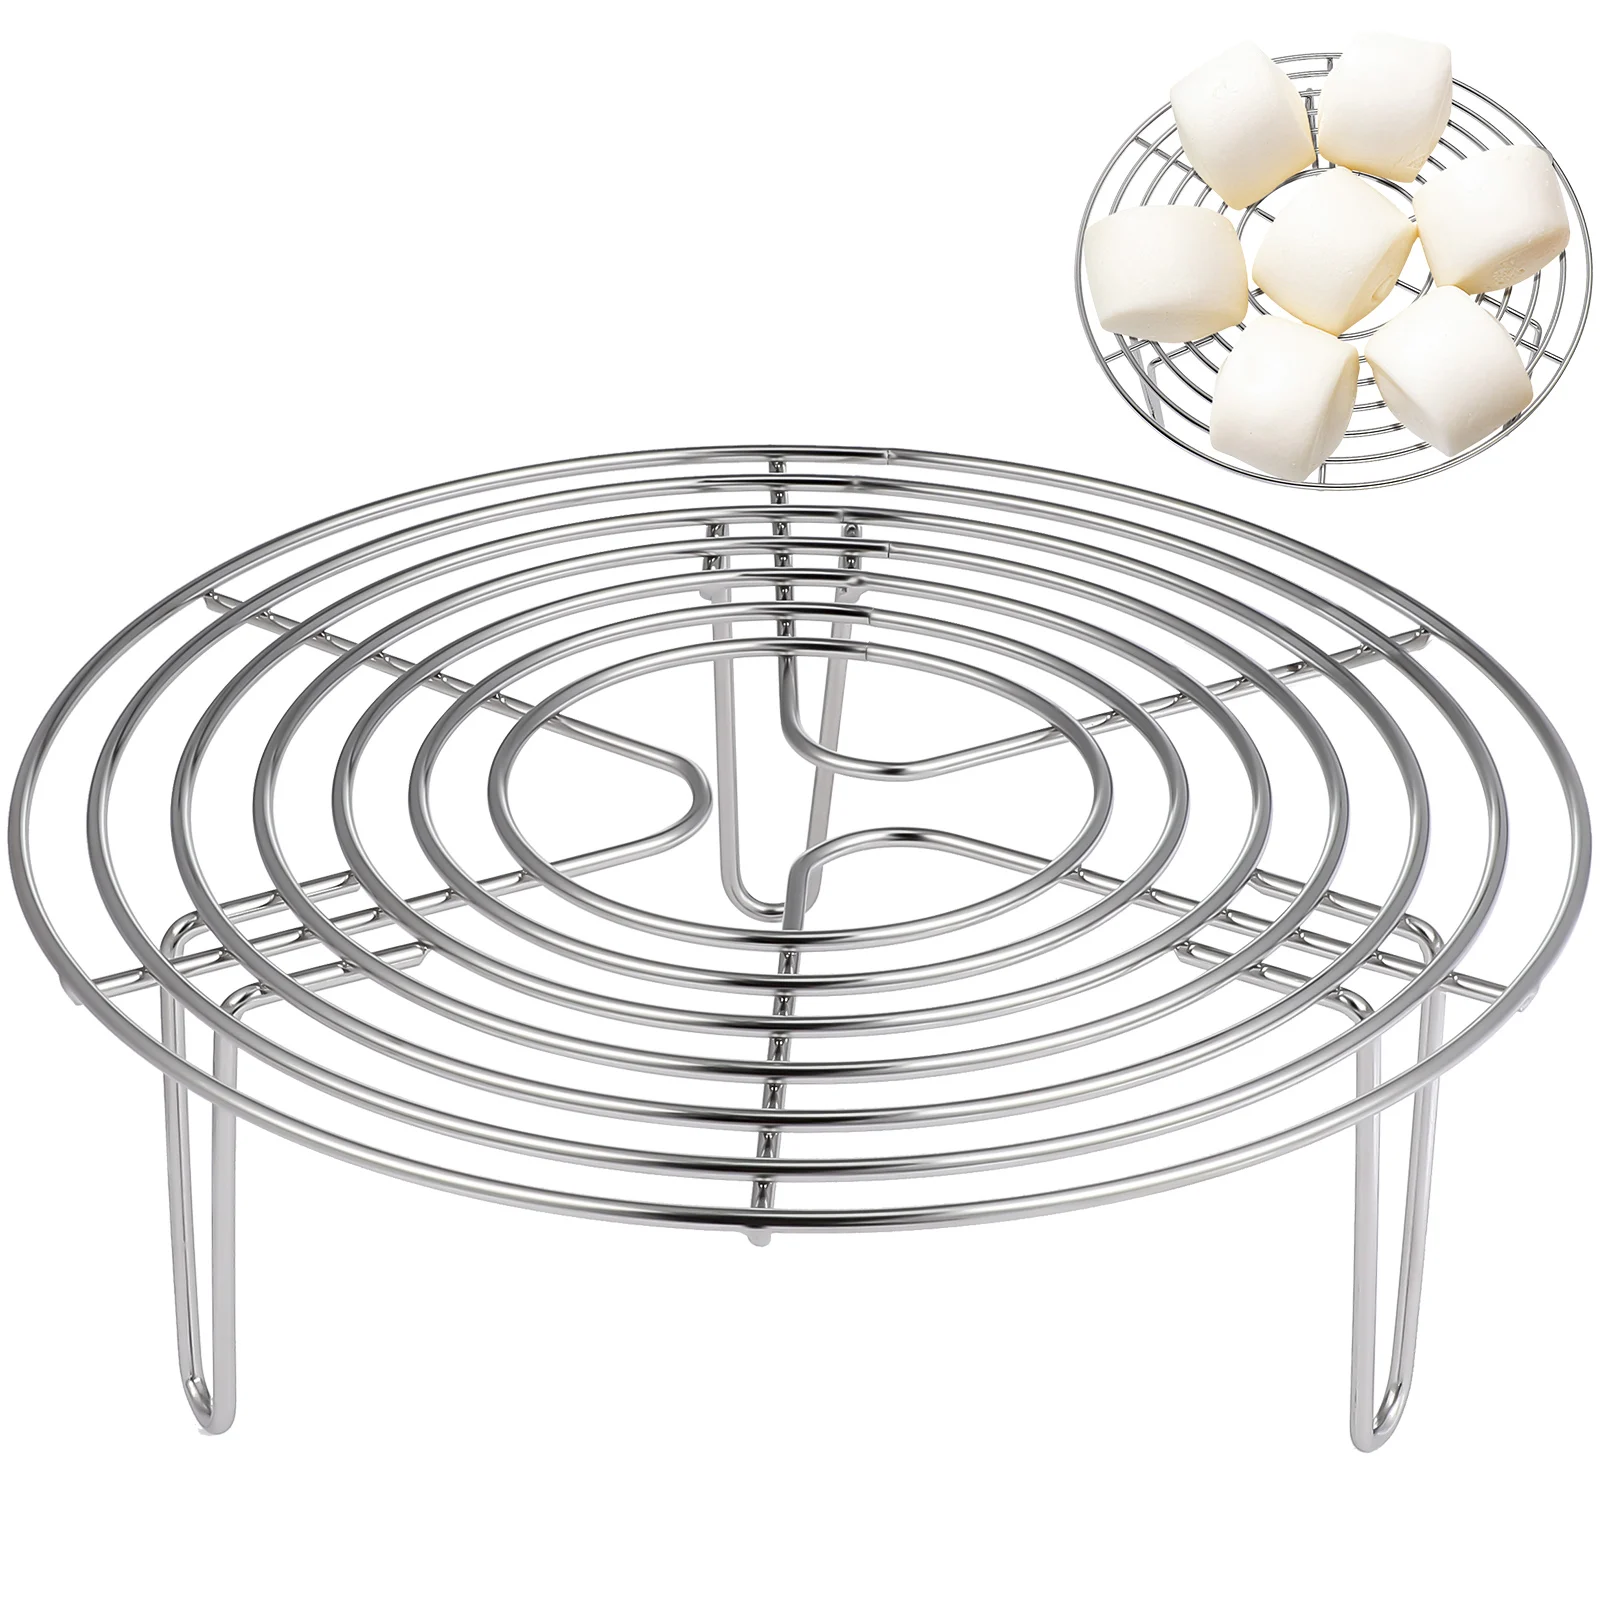 

Stainless Steel Steamer Rack Pot Steaming Tray Stand Cookware Tool Cooling Rack for Steaming Cooking and Baking Kitchenware